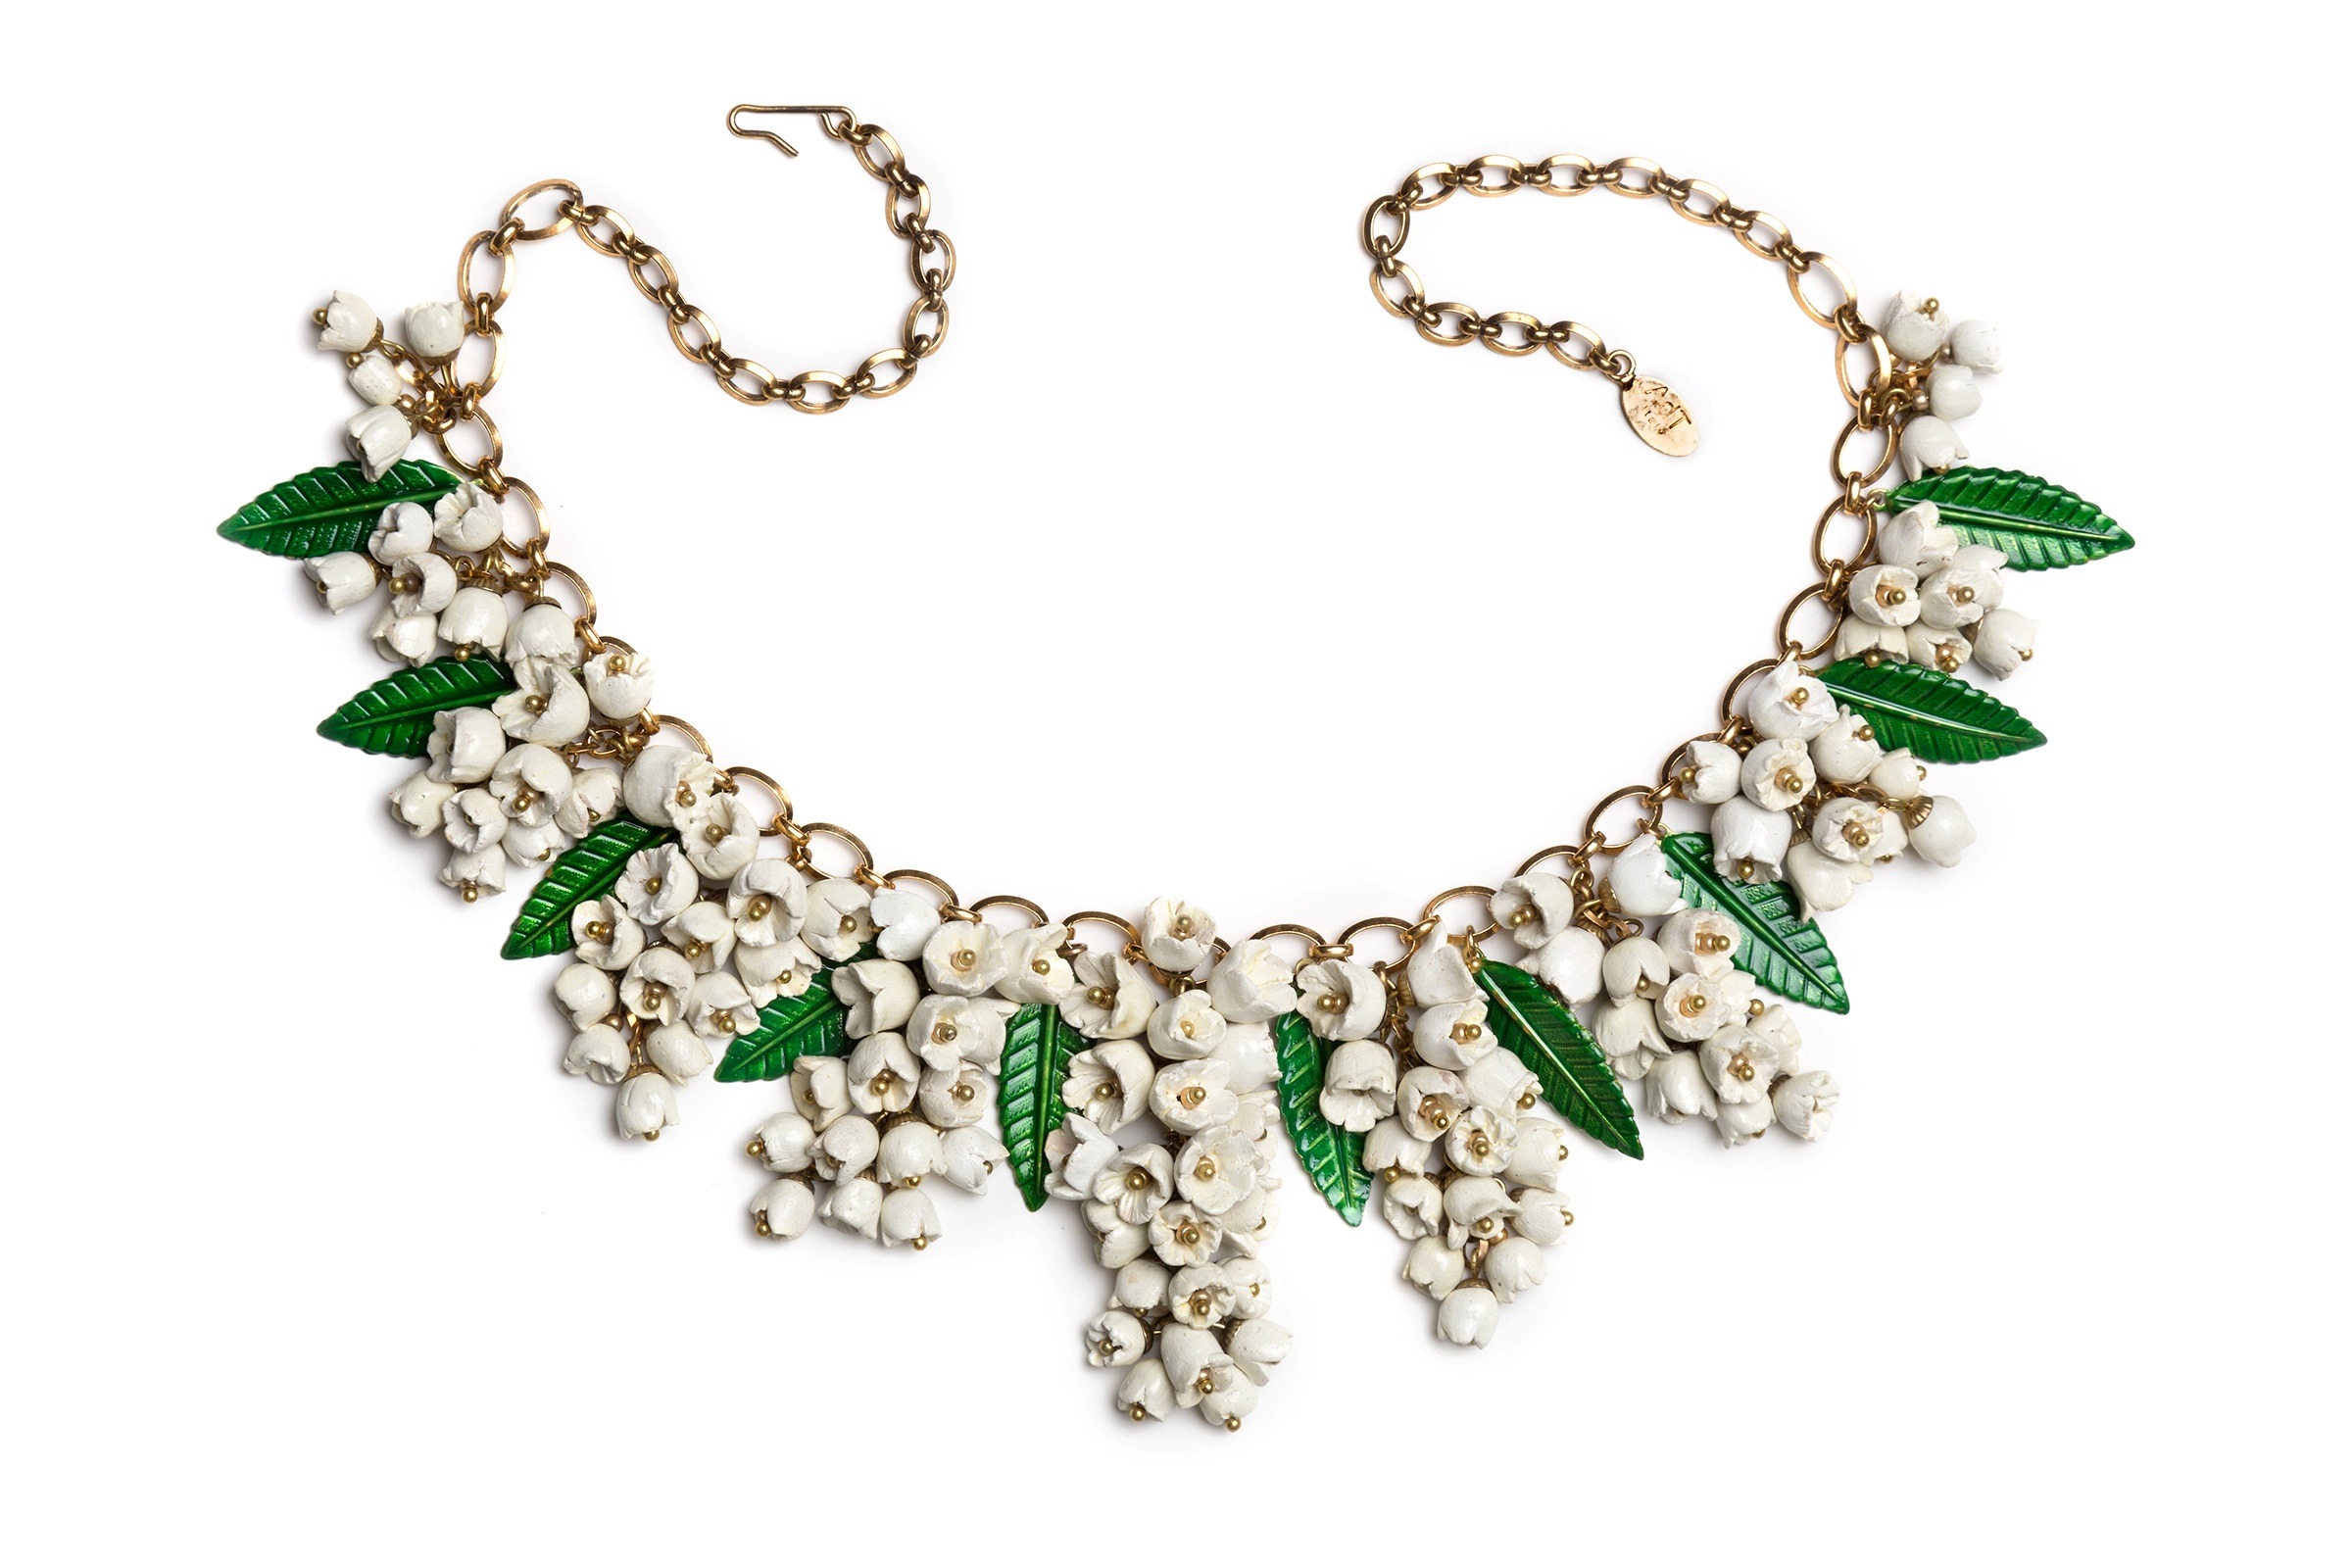 Lily of the Valley necklace